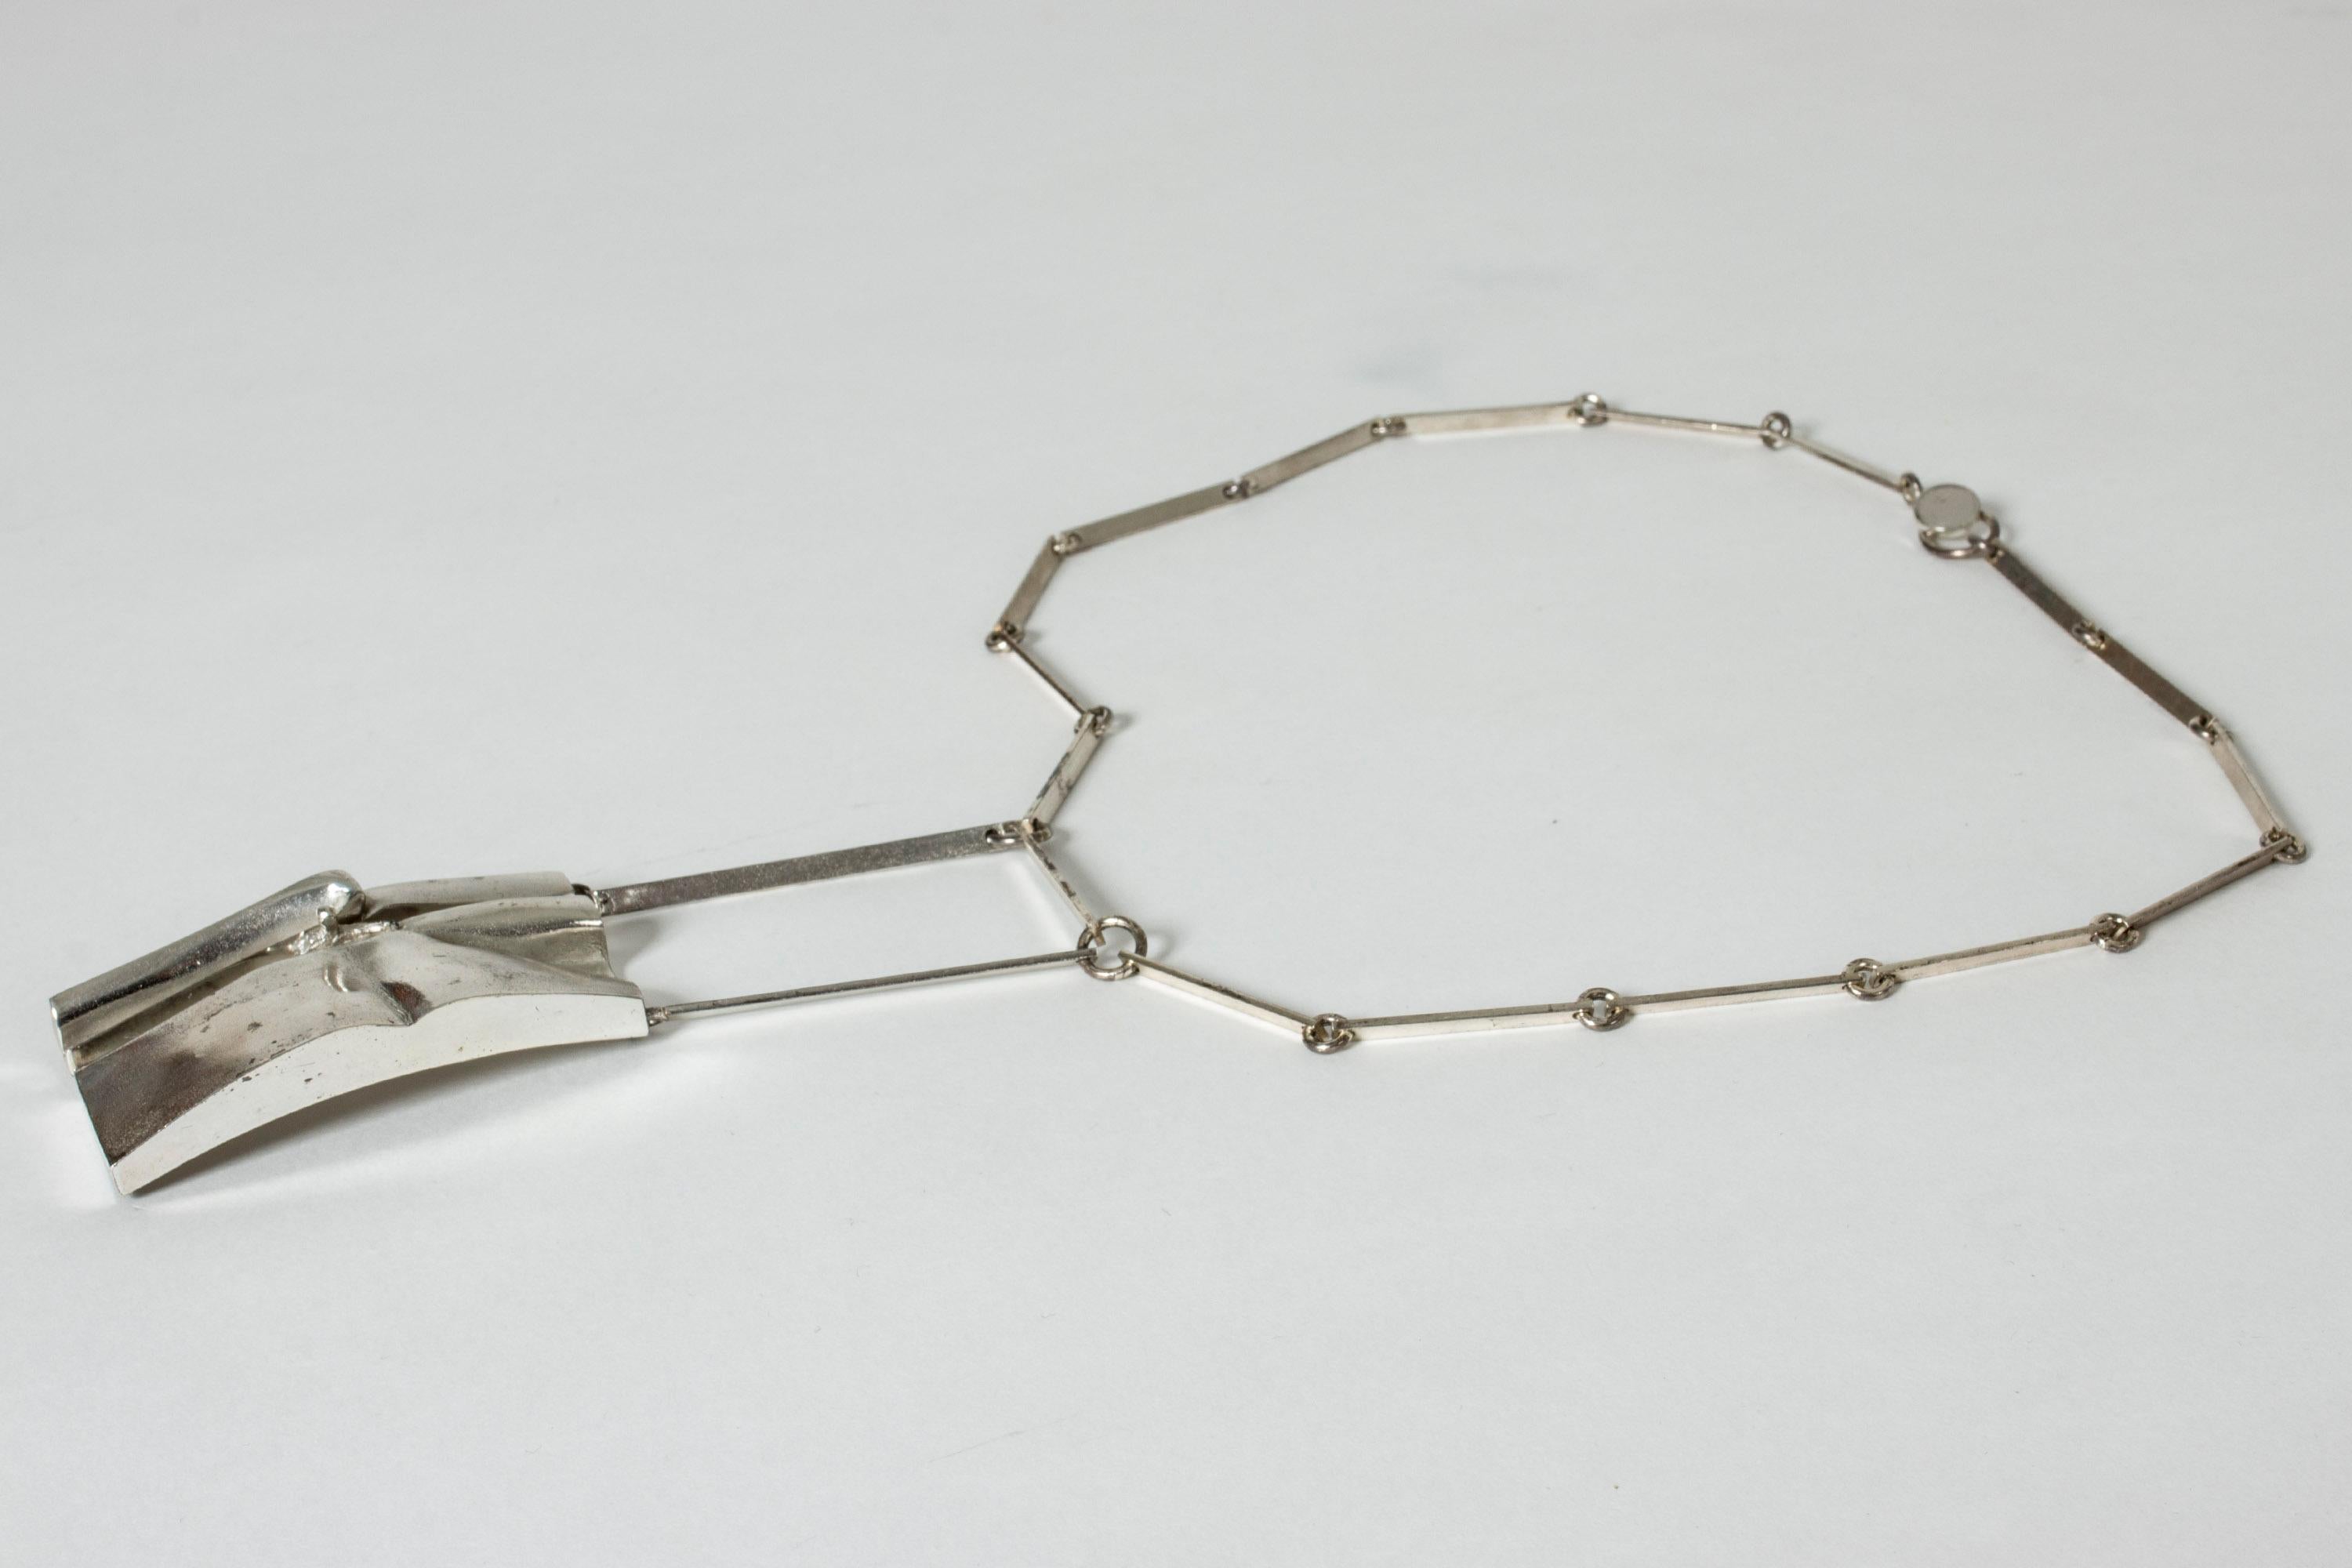 Stunning, bold silver necklace by Björn Weckström. A rare design with a robust chain and large pendant with a small human figure peeking up from a “crack”.